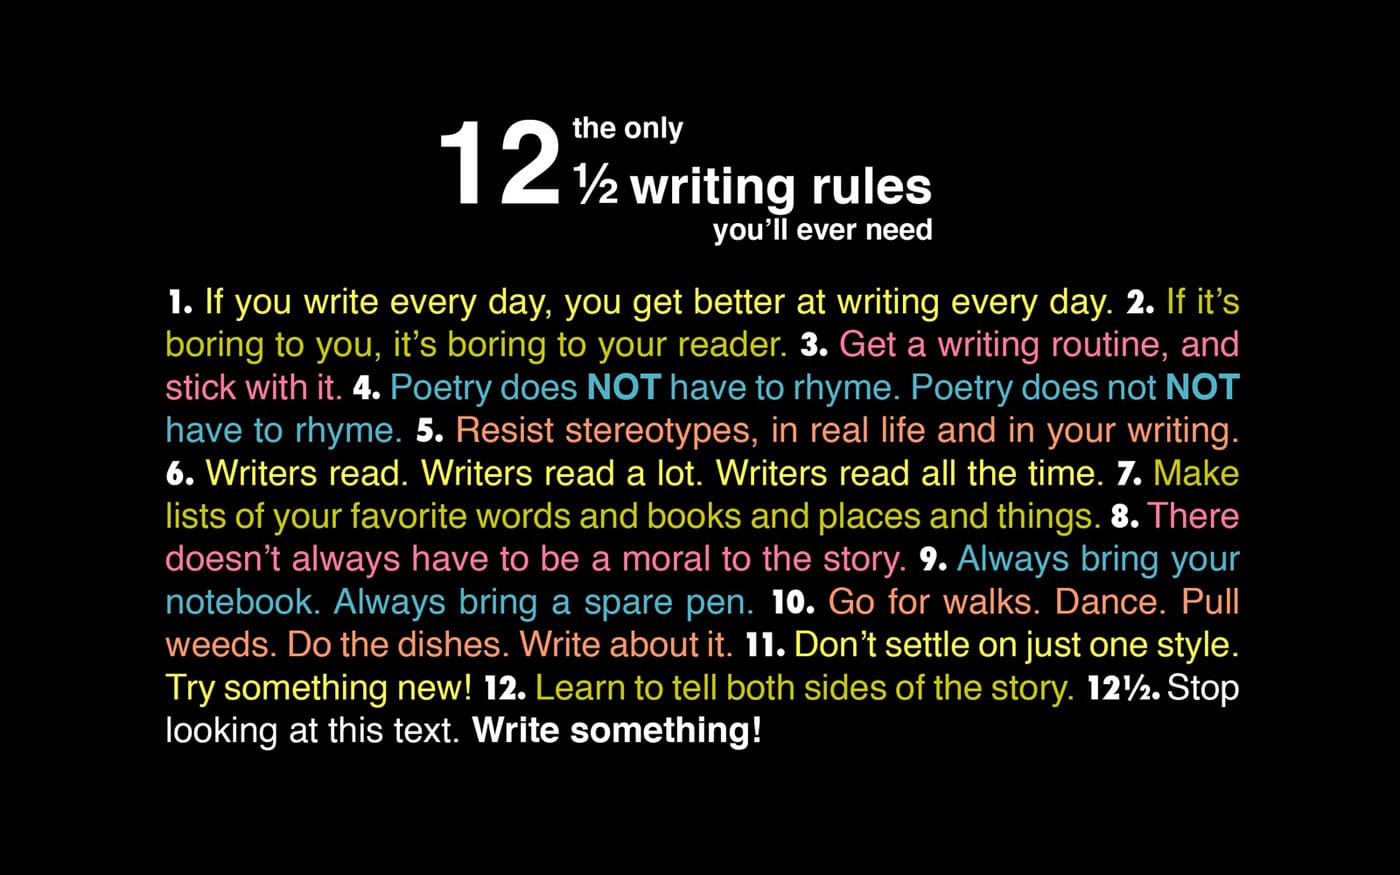 The Only 12 ½ Writing Rules You’ll Ever Need [Chart]